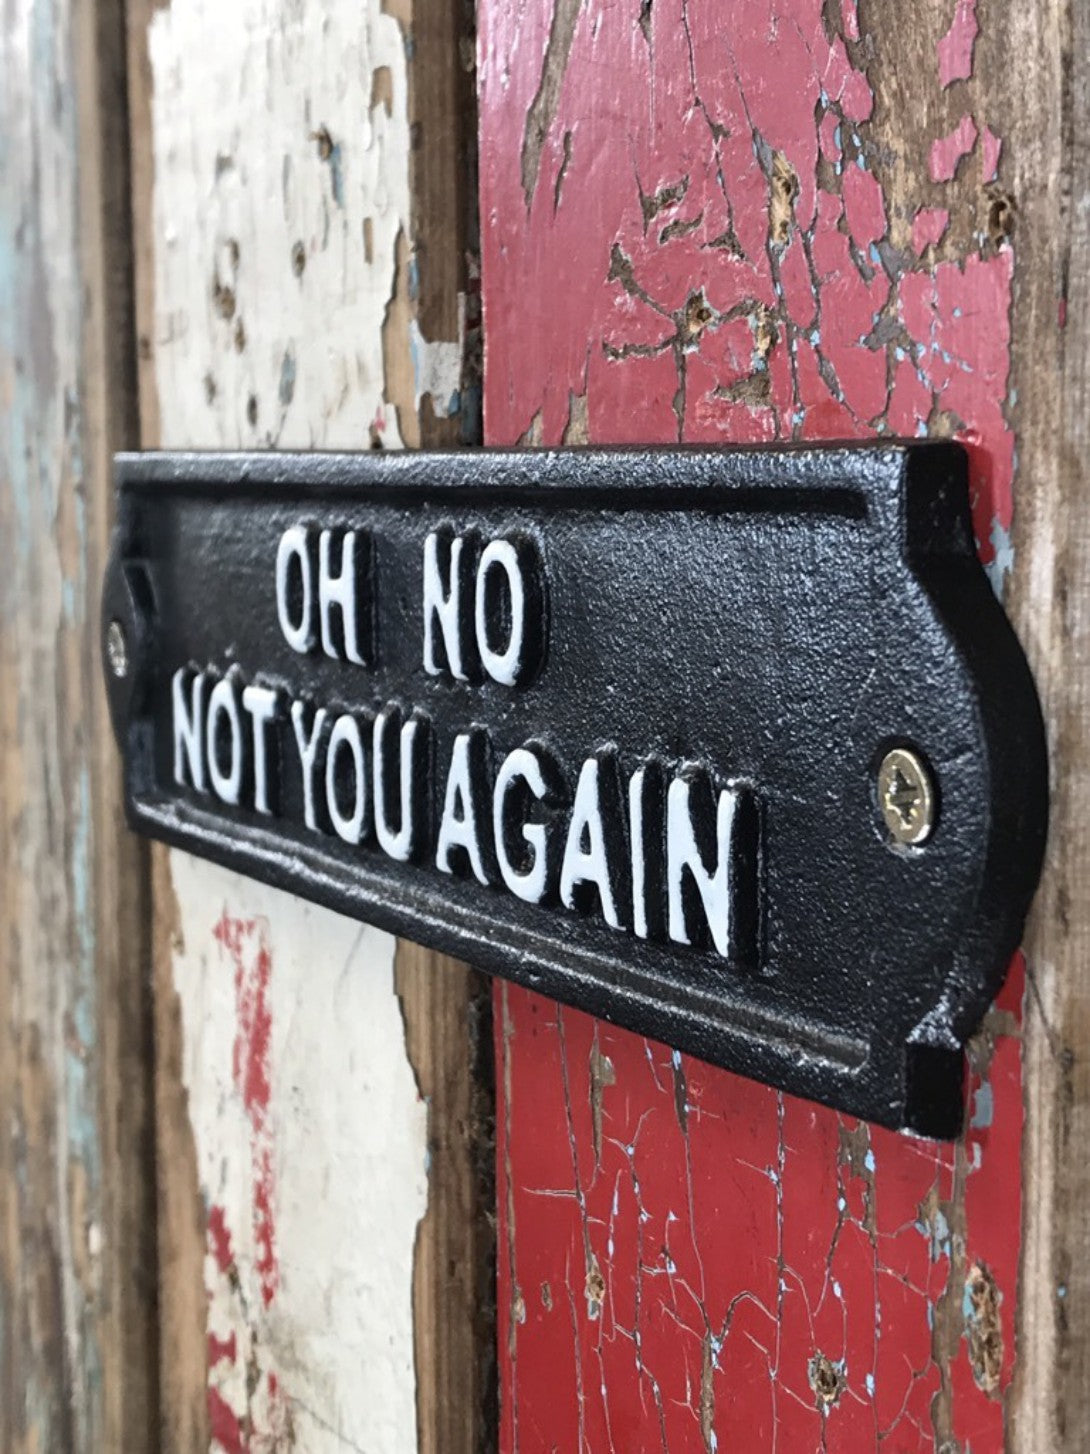 Fun Cast Iron Black Wall Sign With White Raised Text “OH NO NOT YOU AGAIN”